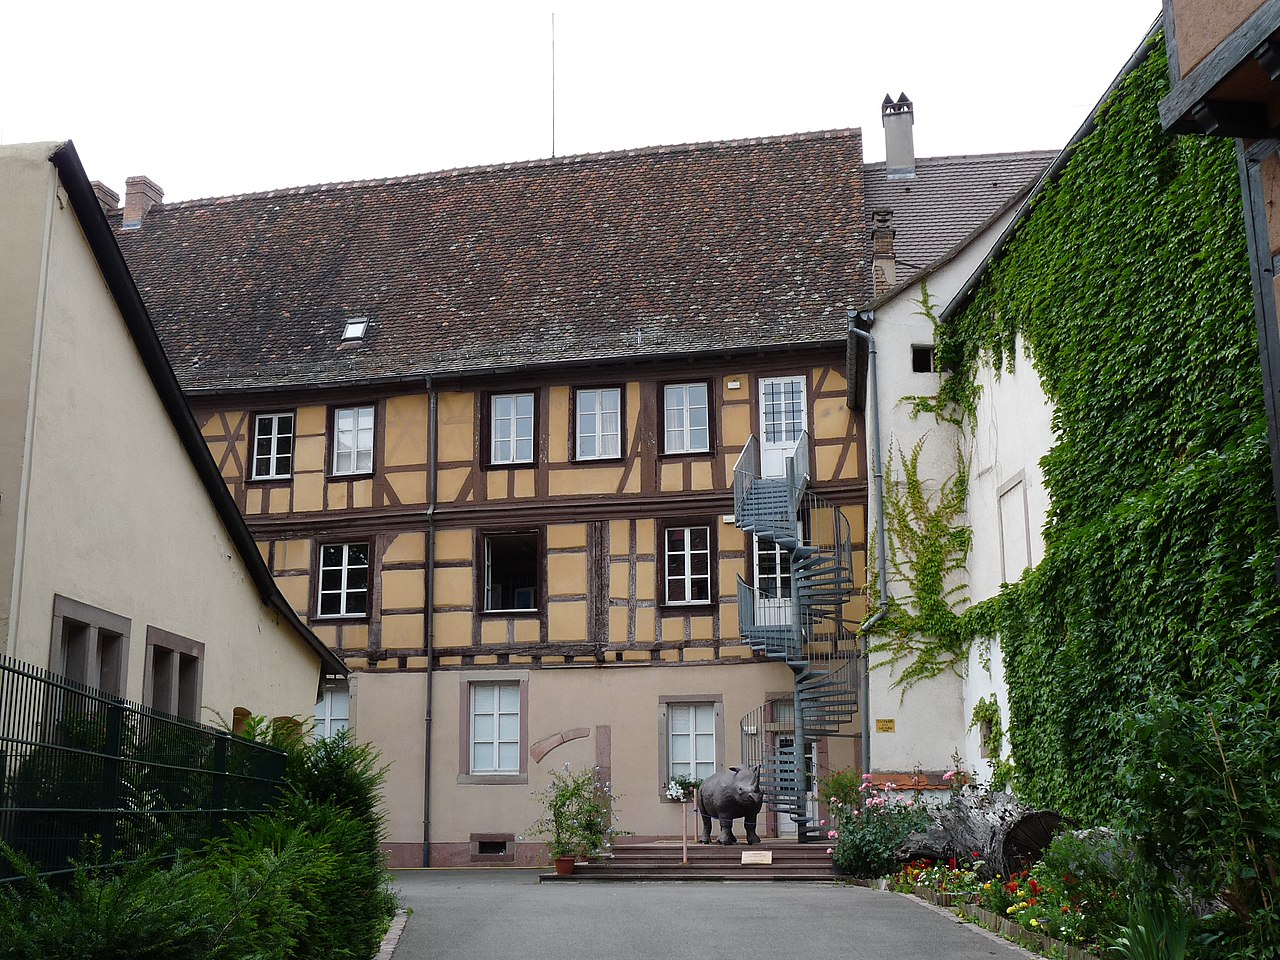 Museum of Natural History and Ethnography of Colmar